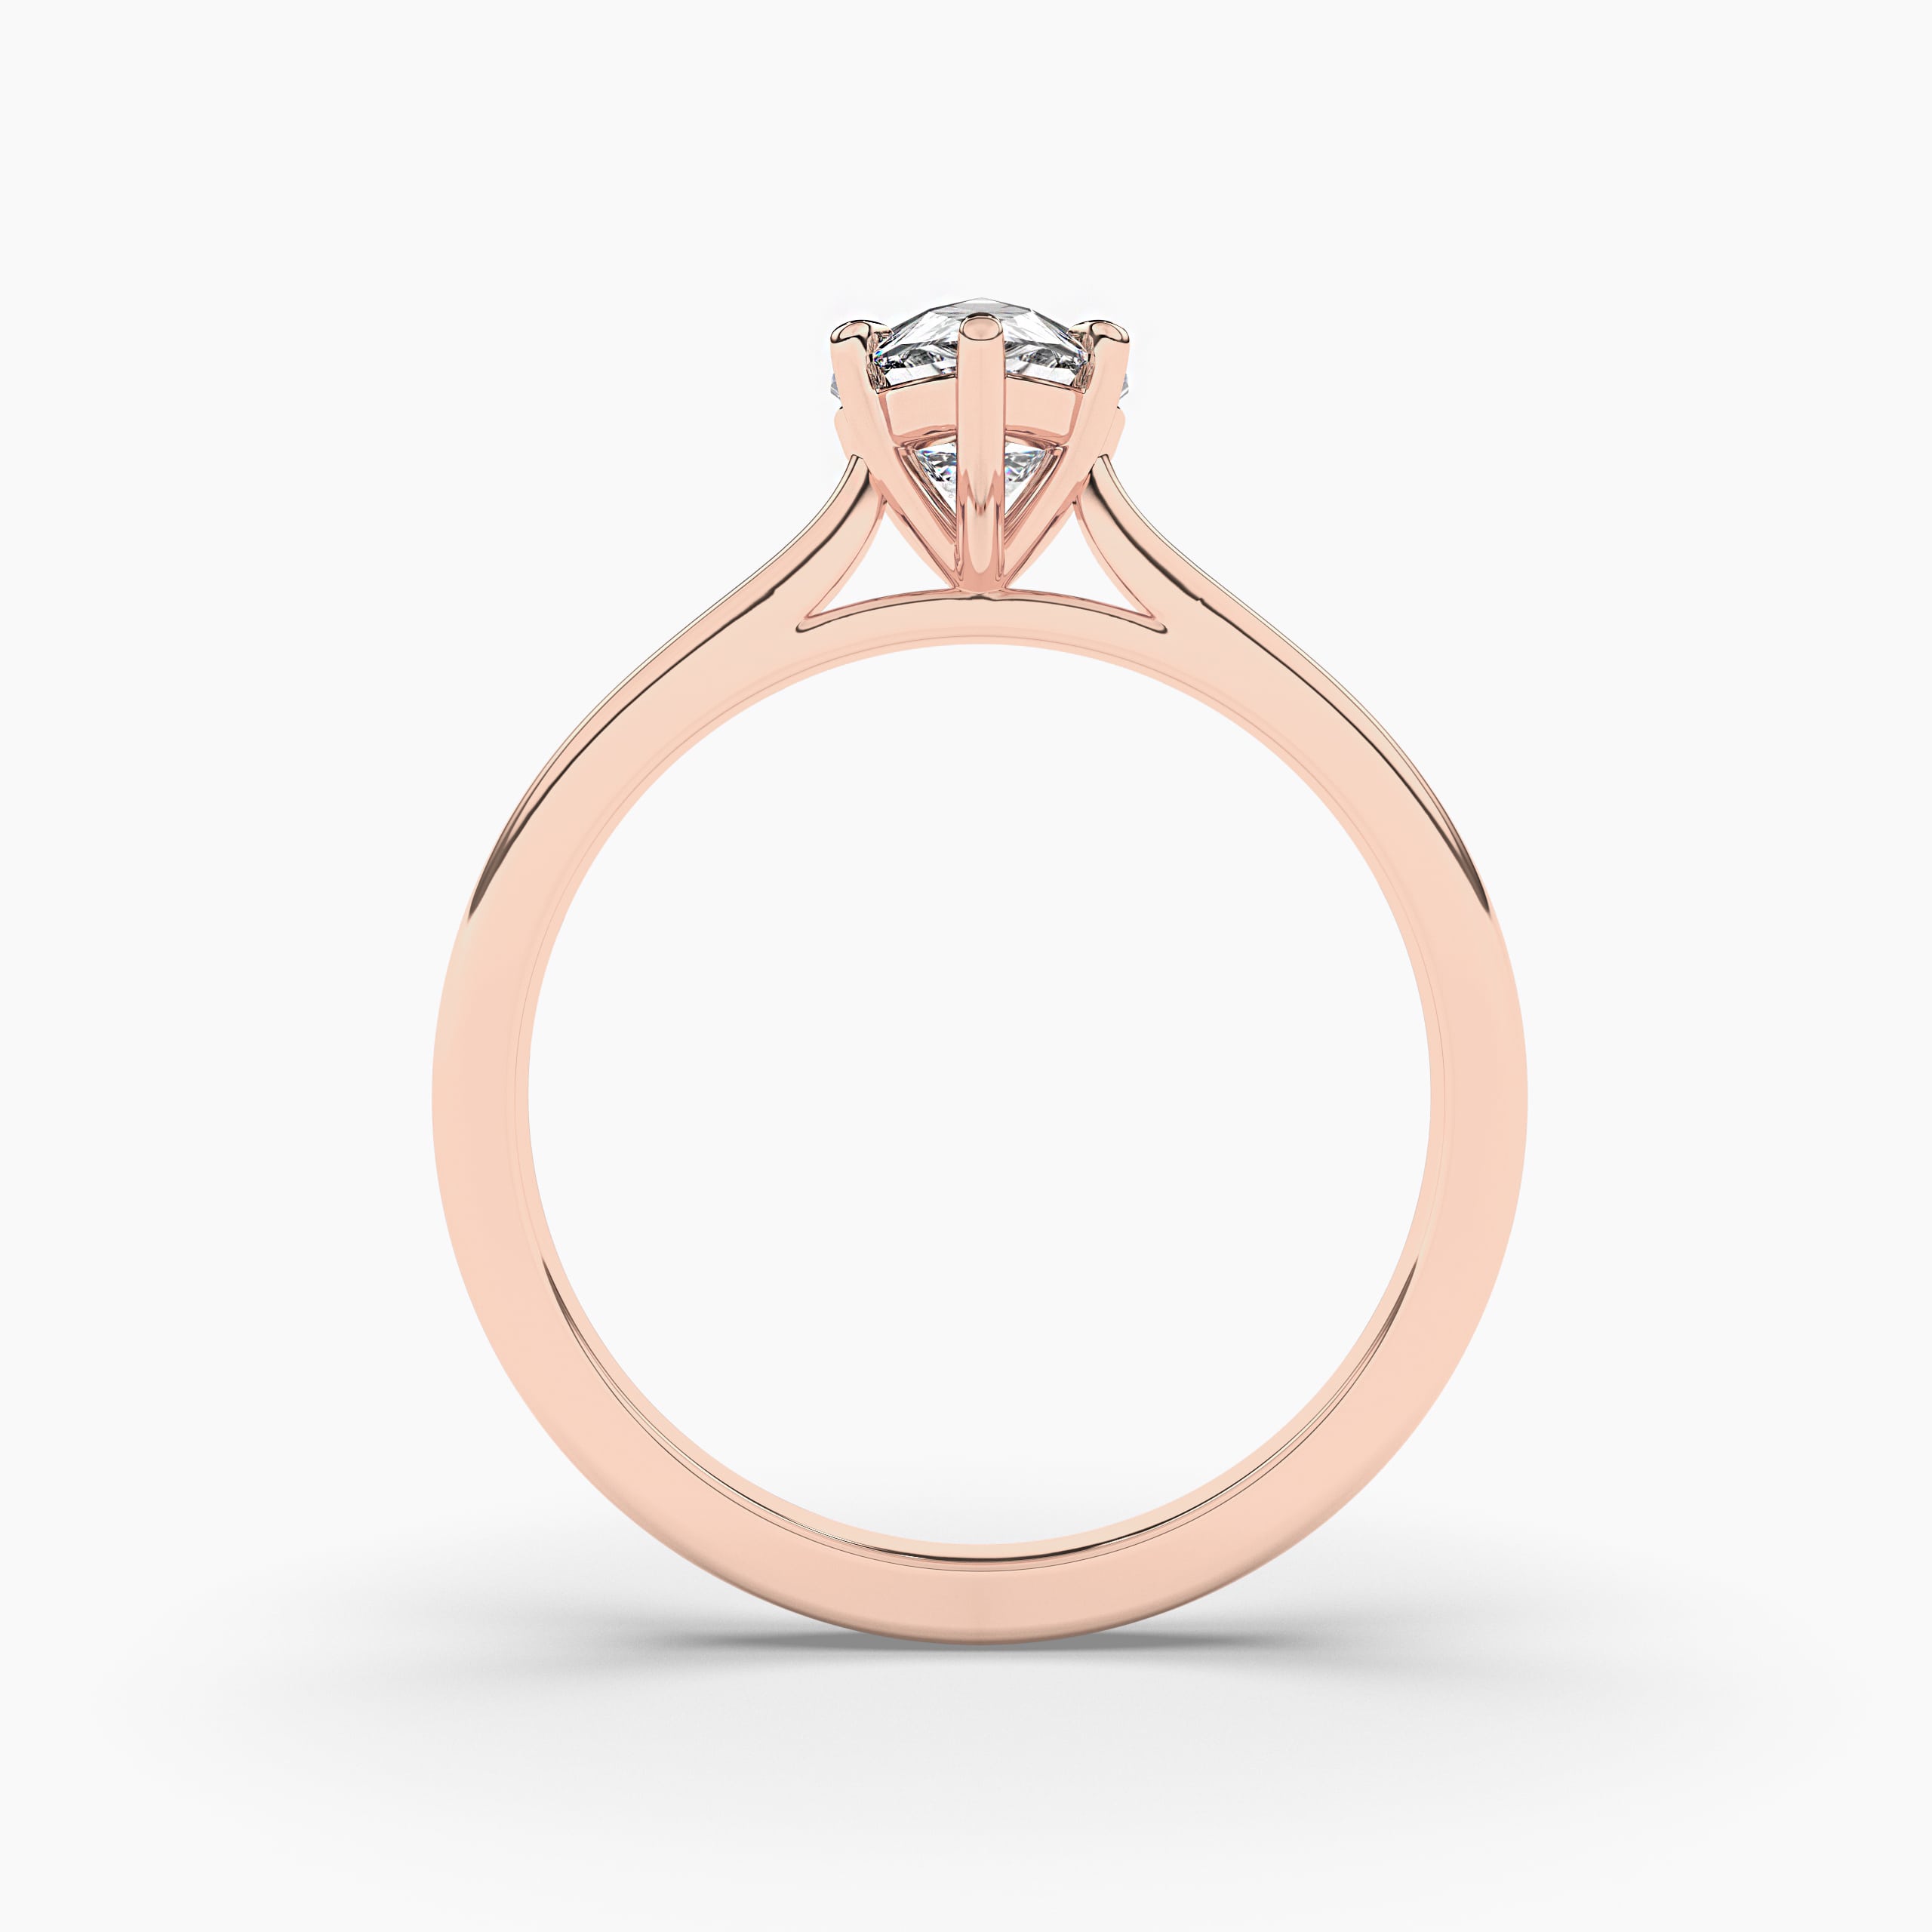  Pear Solitaire Engagement Ring Rose Gold